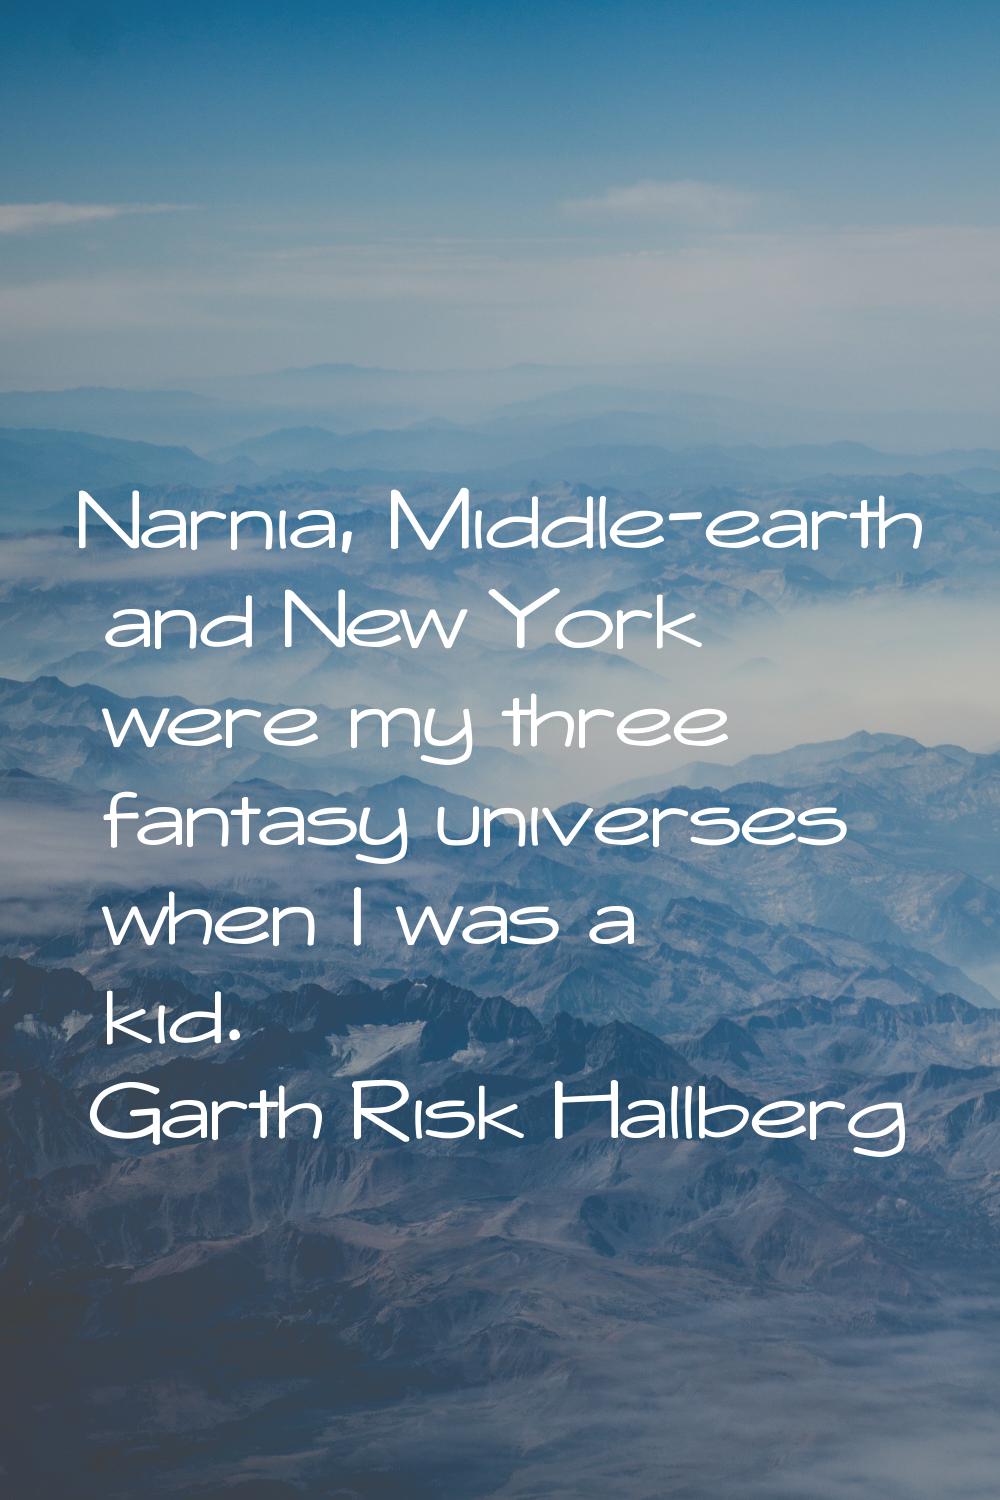 Narnia, Middle-earth and New York were my three fantasy universes when I was a kid.